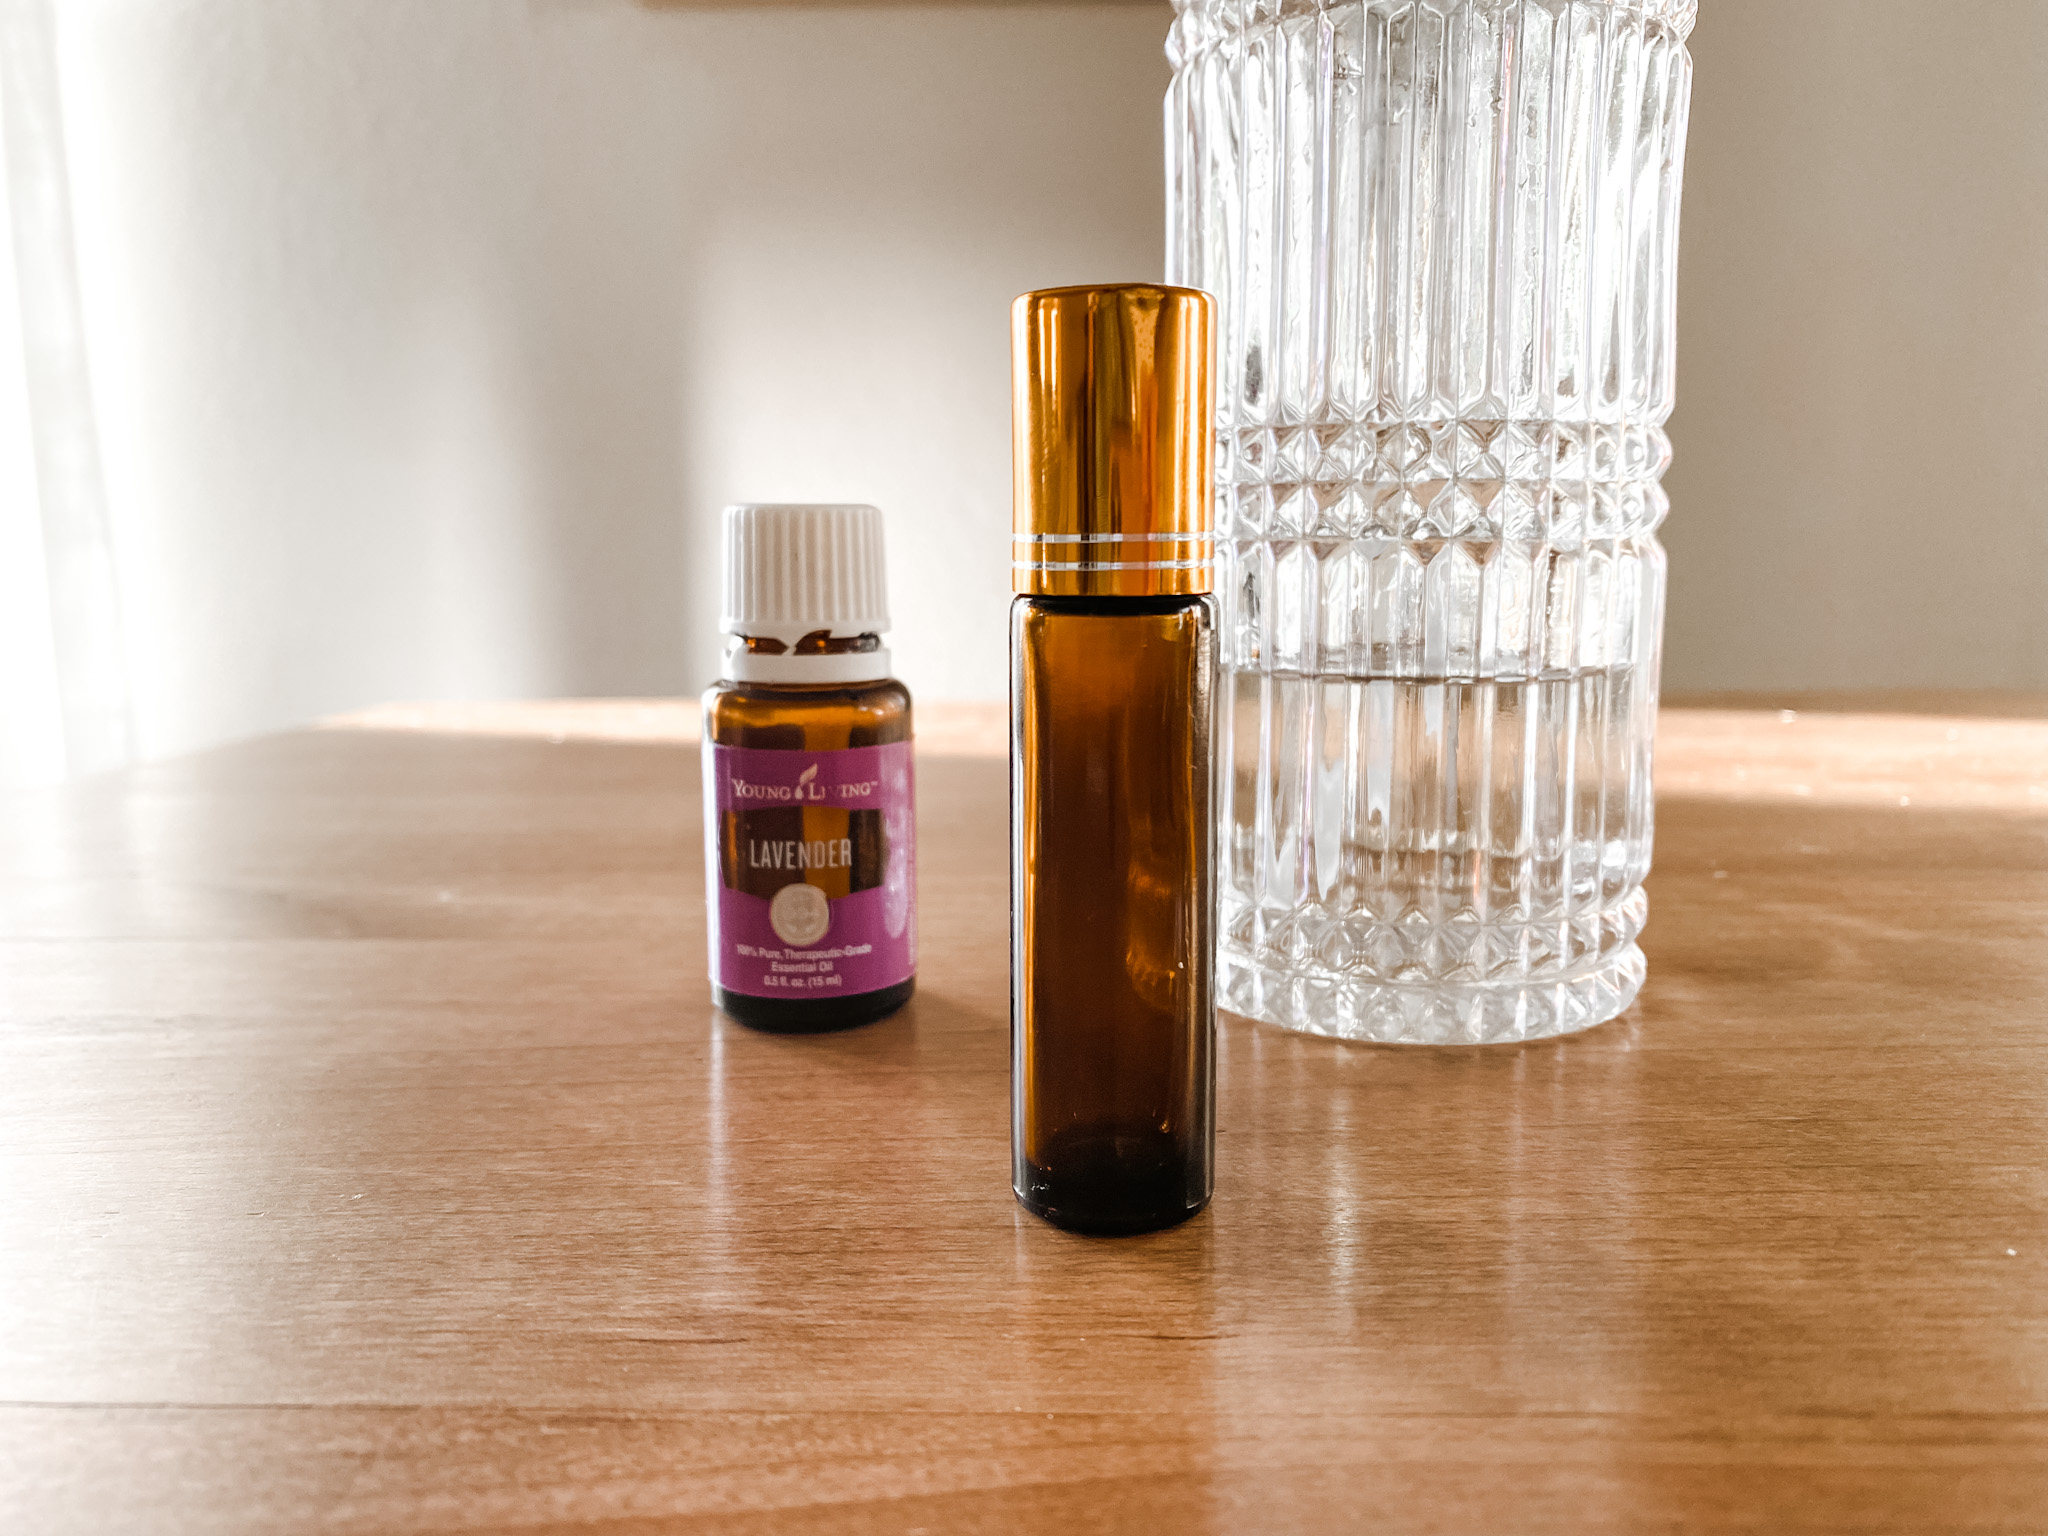 Essential Oil Roller Ball next to Lavender essential oil and crystal carrier oil dispenser on a wood table.